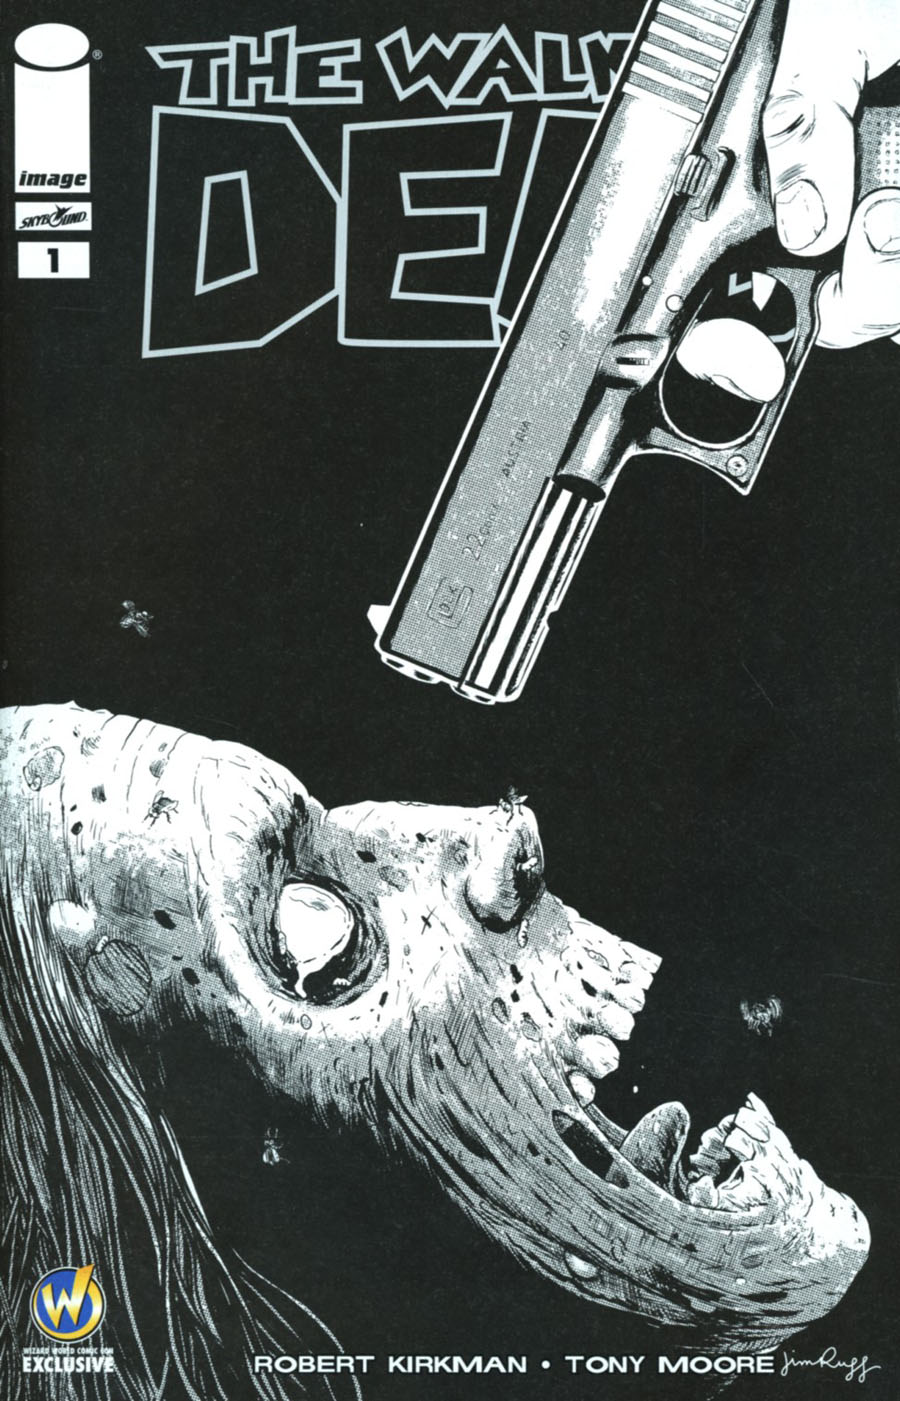 Walking Dead #1 Cover M Wizard World Comic Con Pittsburgh VIP Exclusive Jim Rugg Sketch Variant Cover